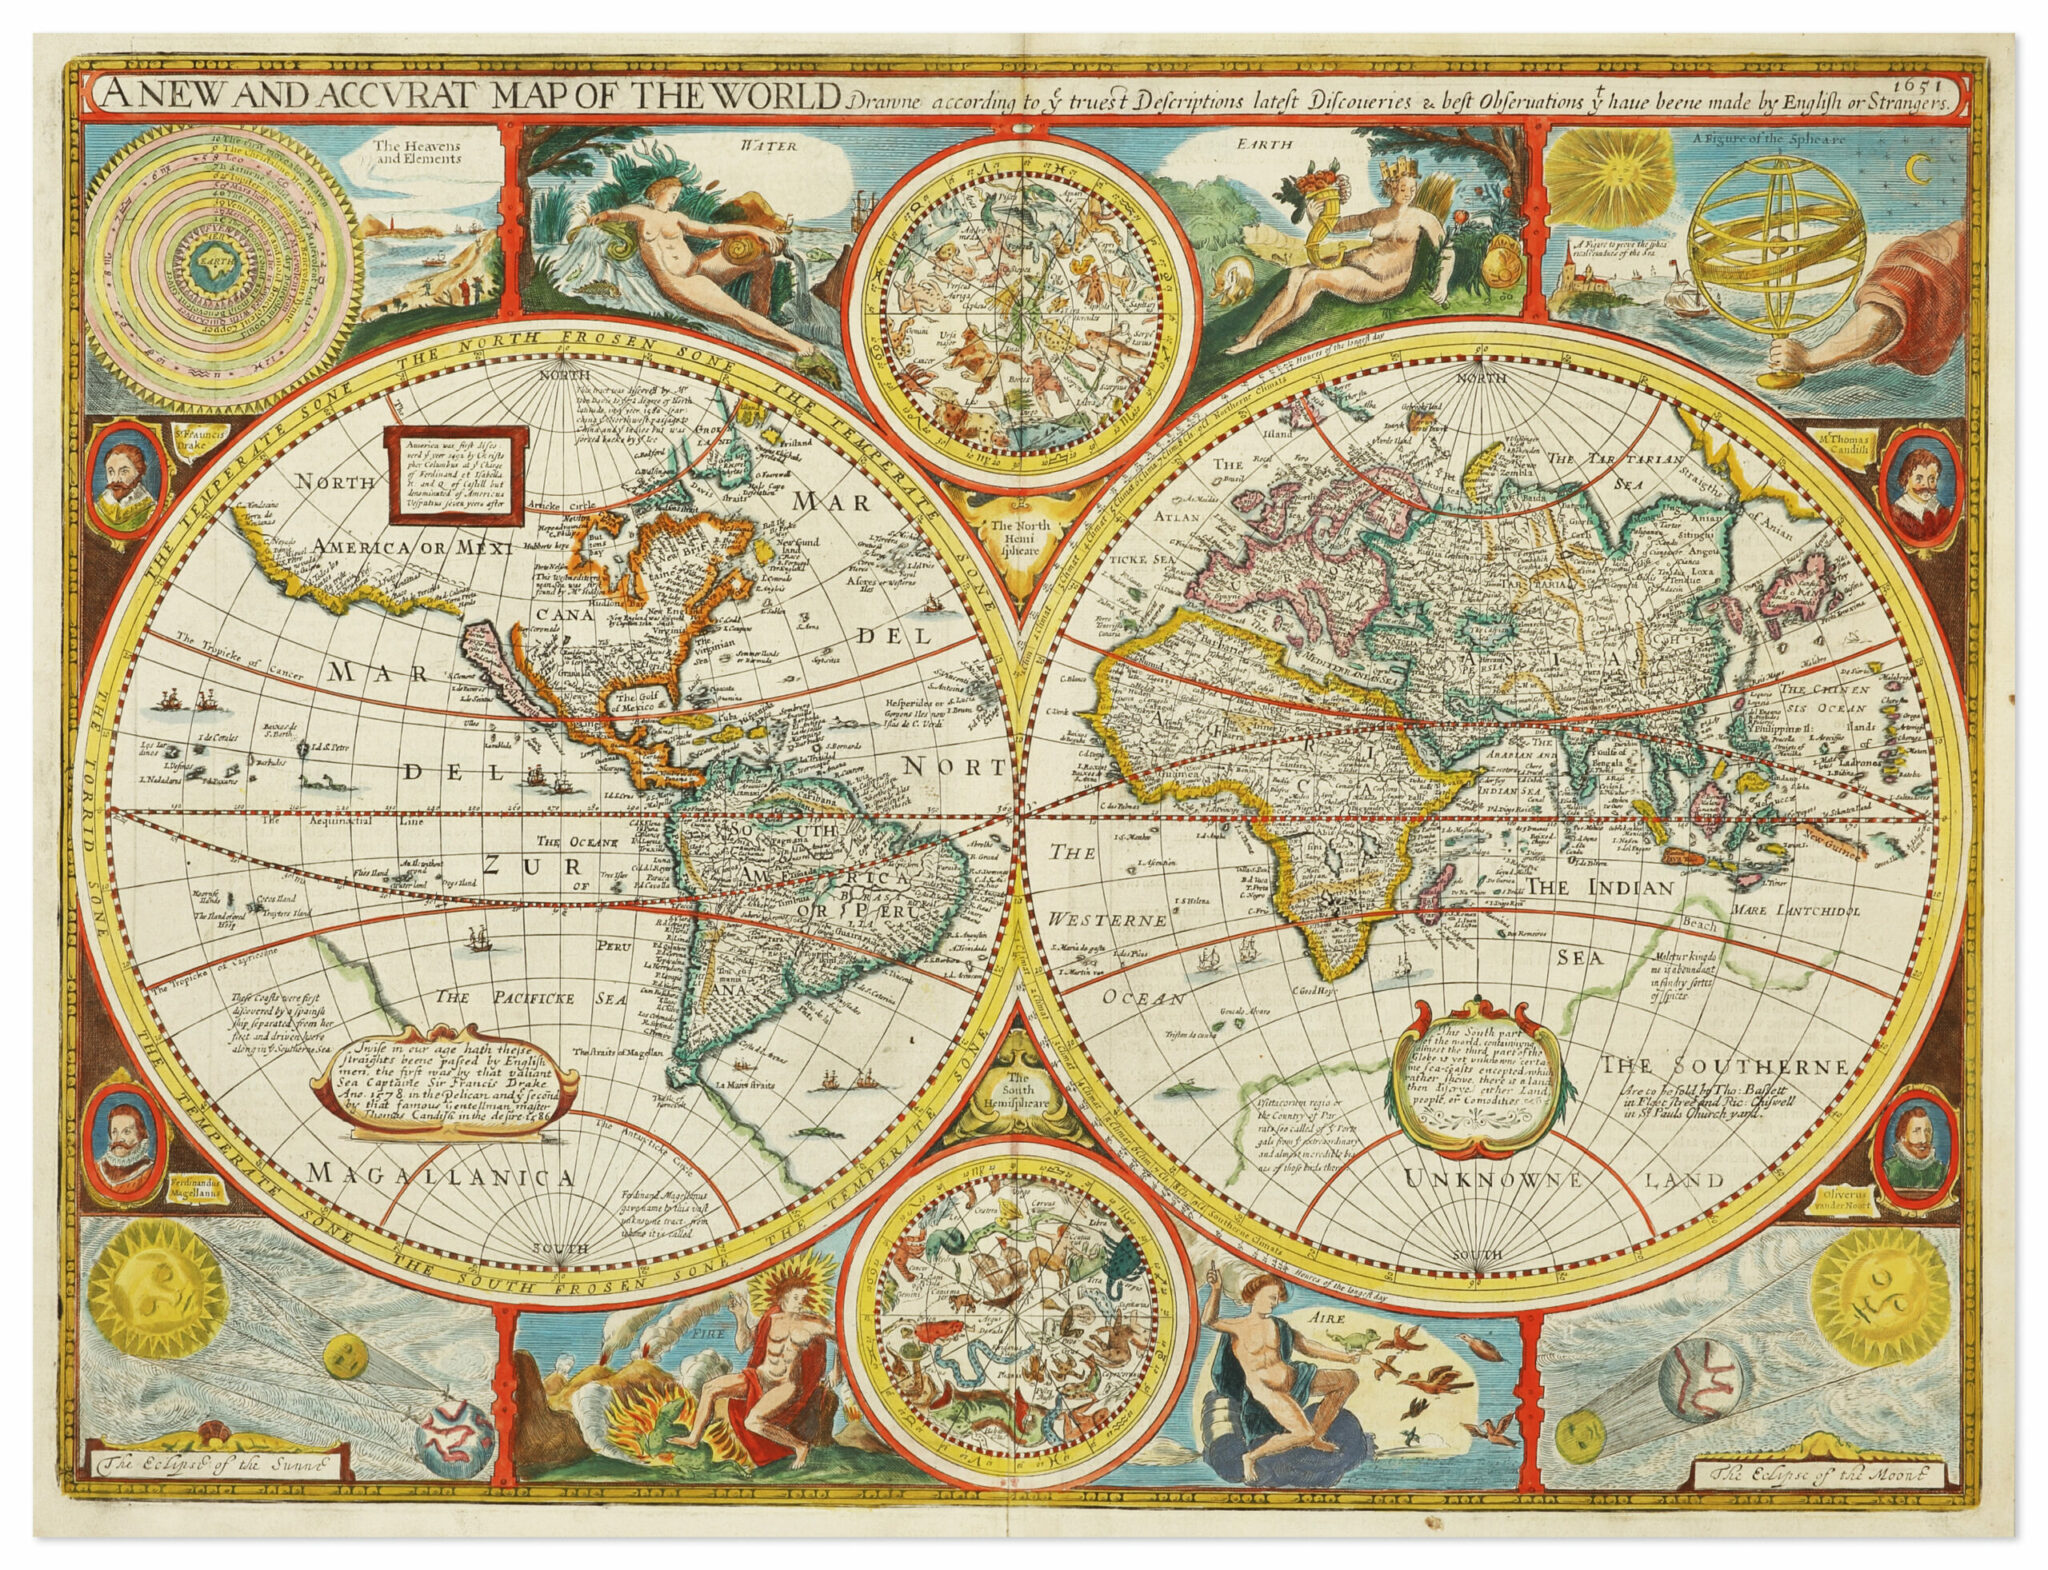 where did maps come from and who made the first accurate map of the world scaled